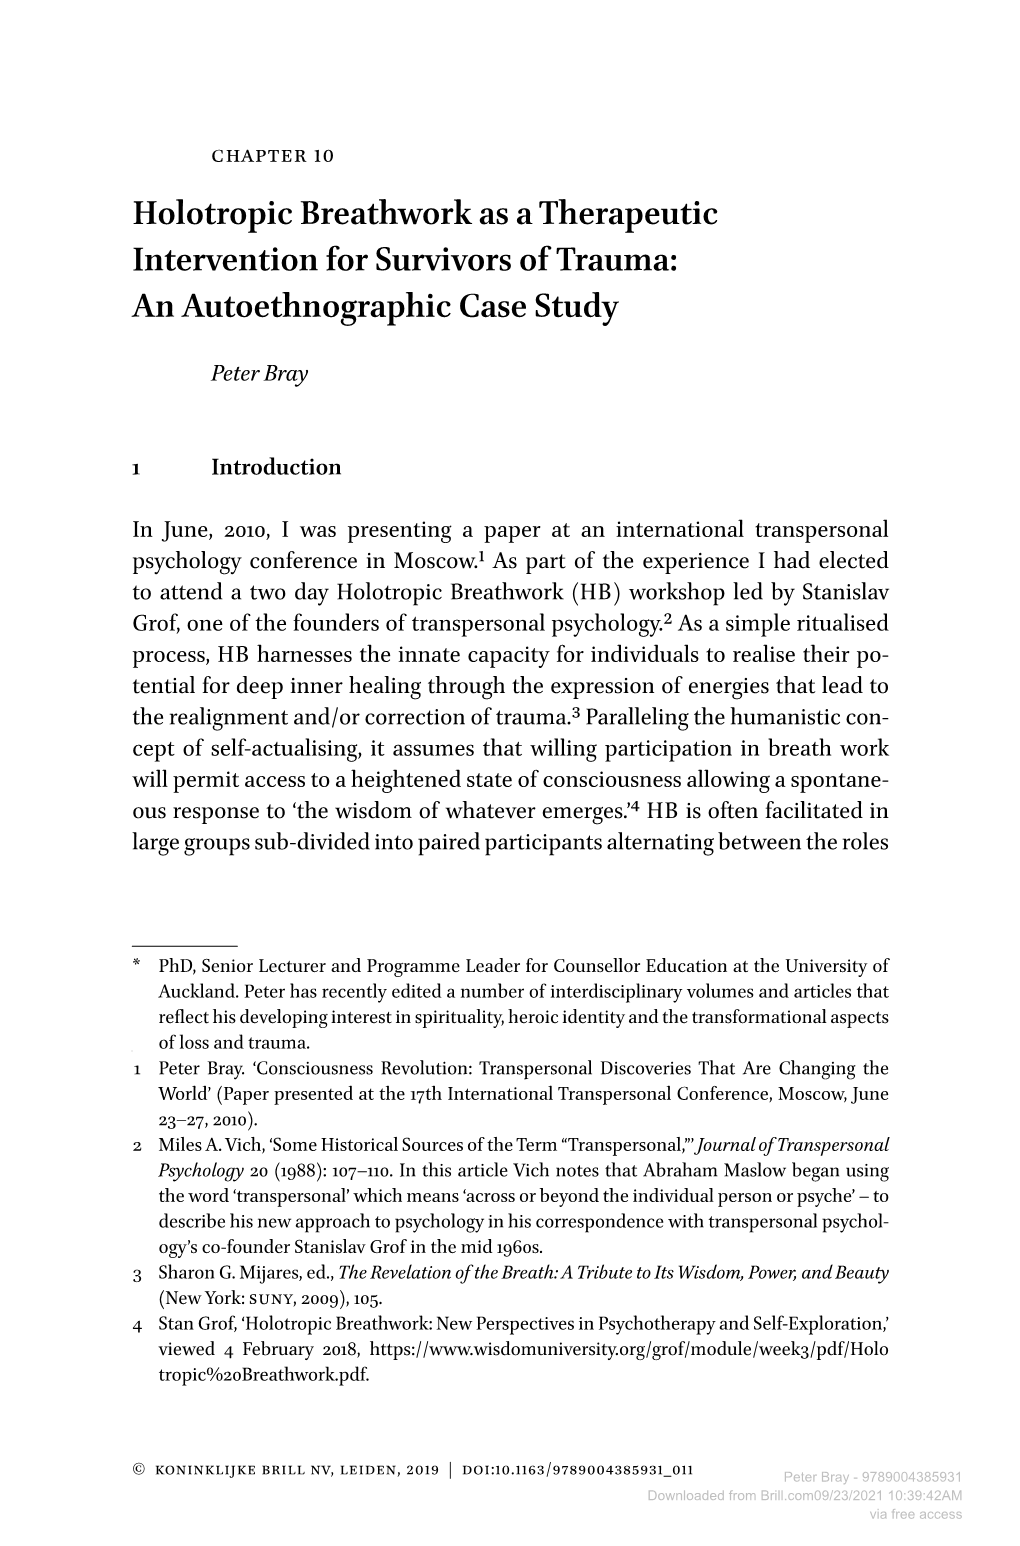 Holotropic Breathwork As a Therapeutic Intervention for Survivors of Trauma: an Autoethnographic Case Study